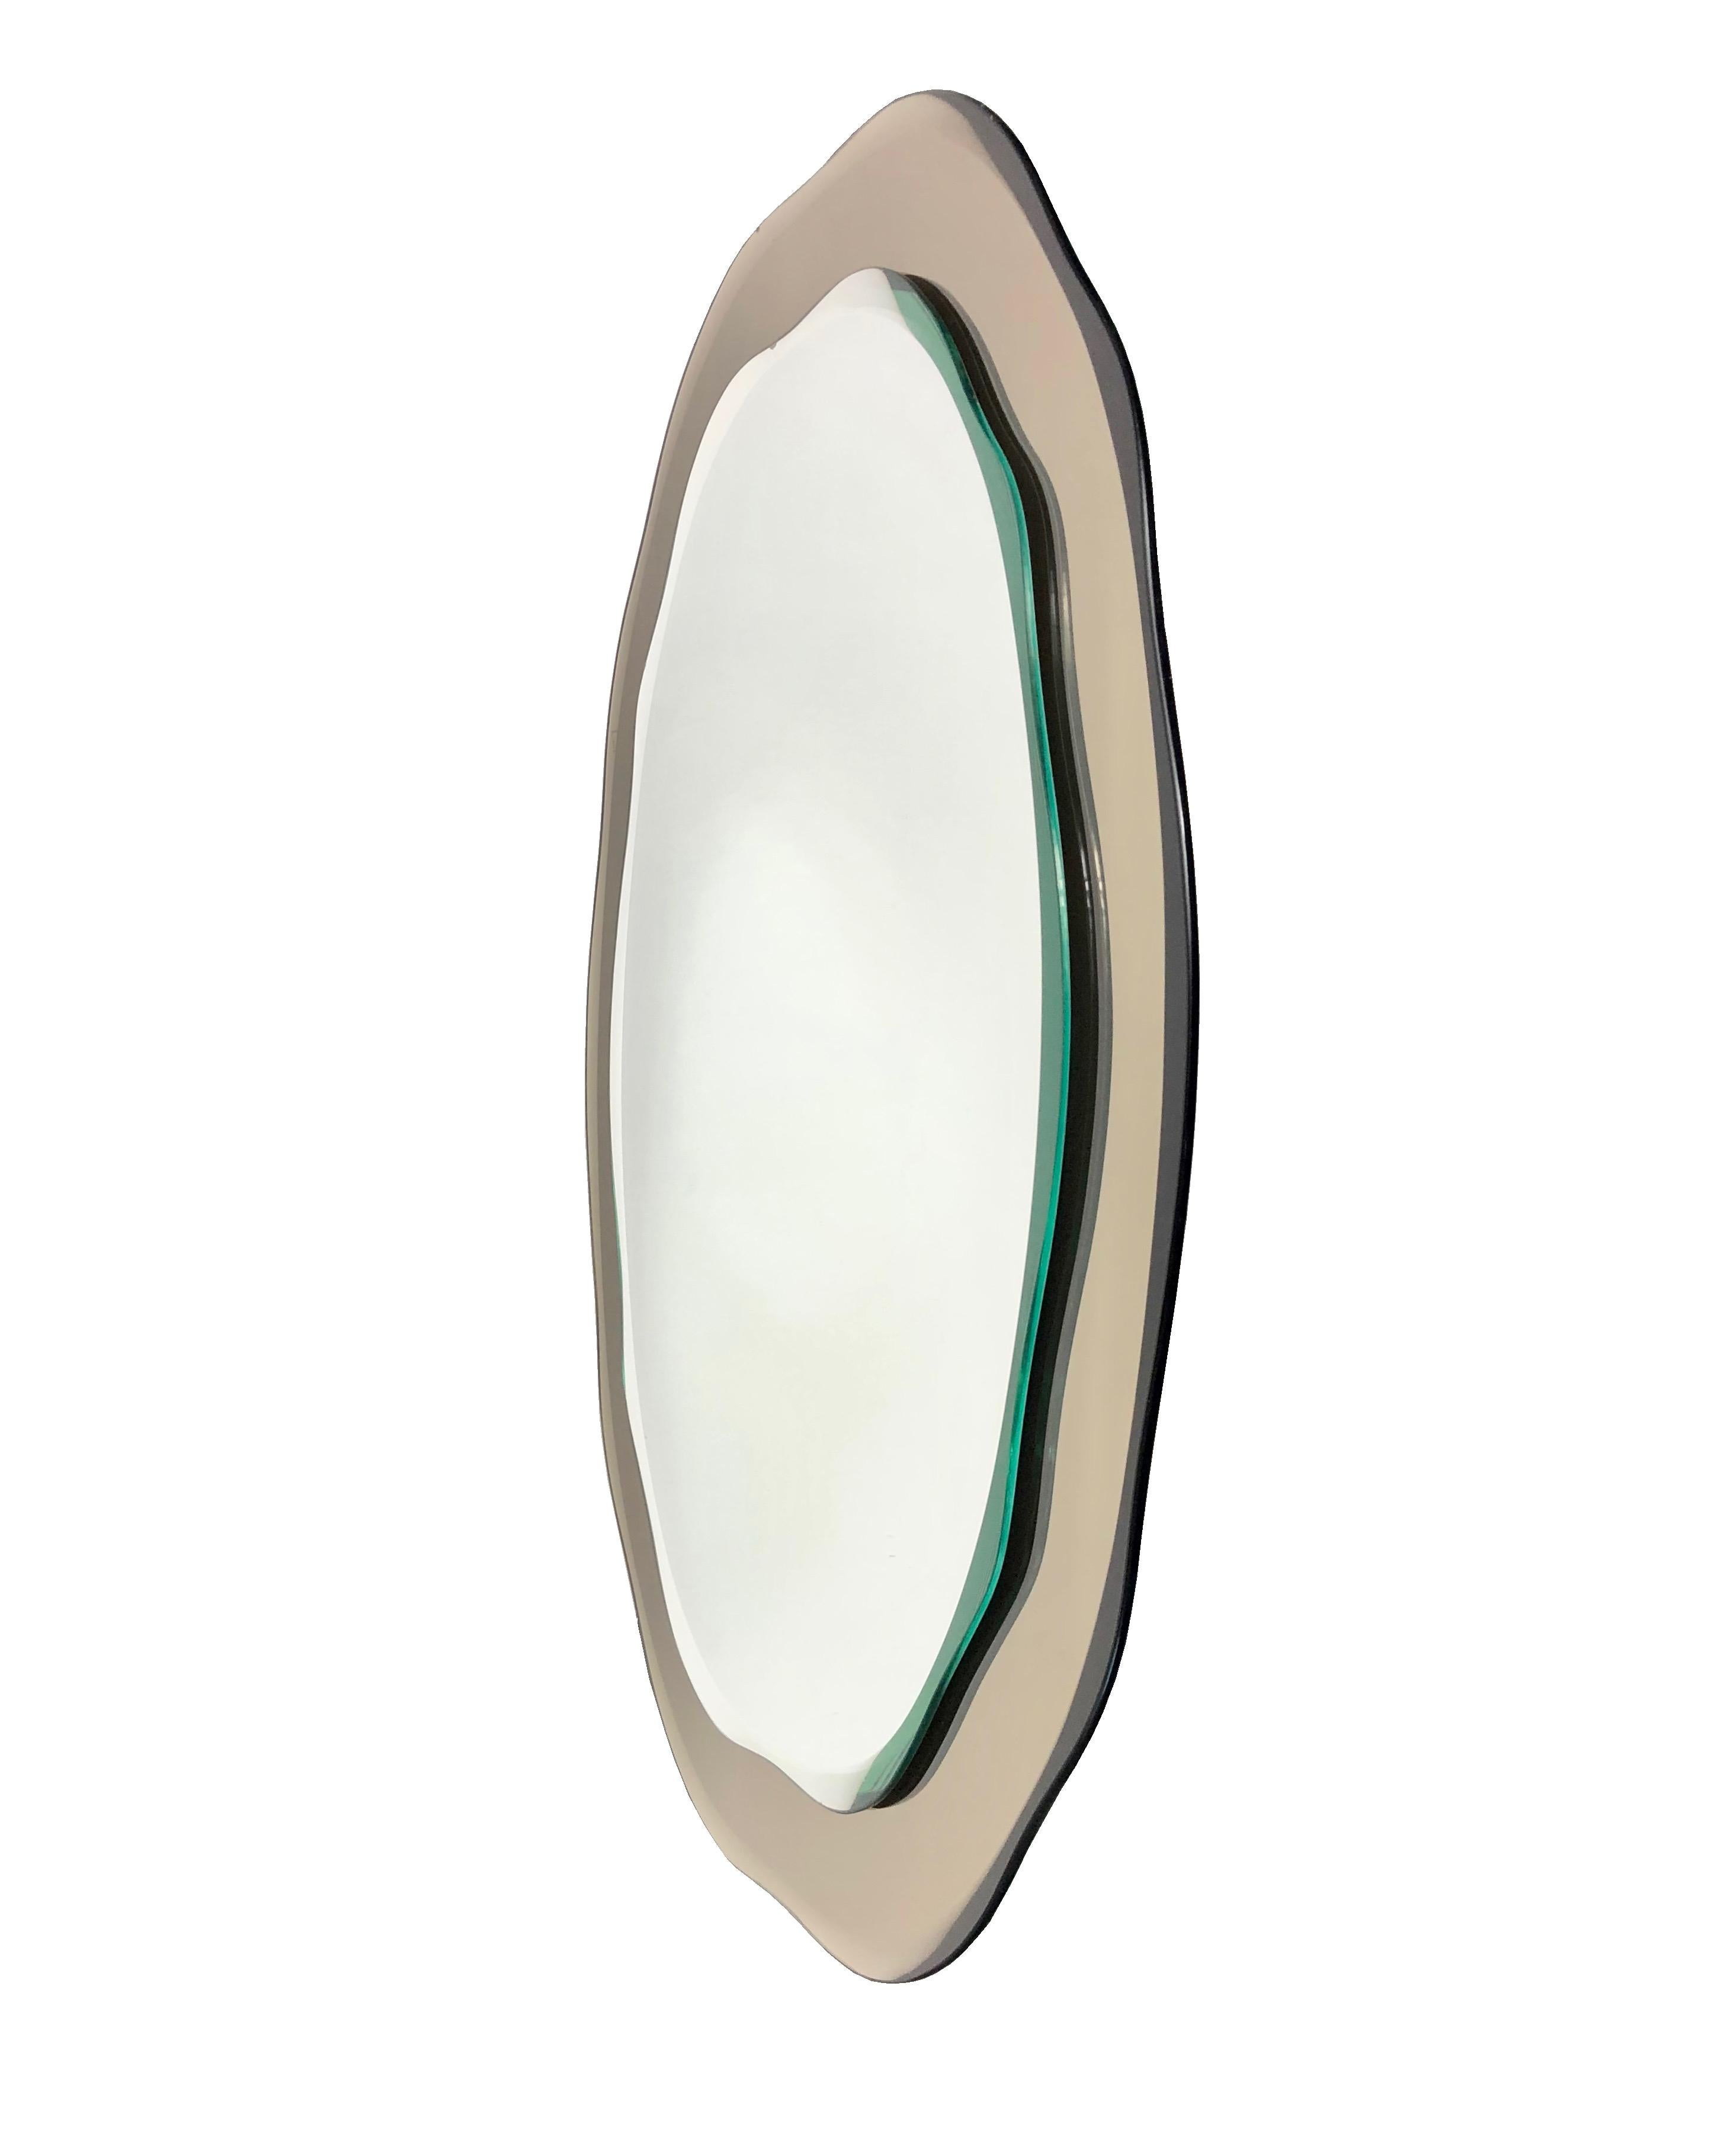 Italian Wall Mirror by Cristal Arte, Italy, 1960s, Mid-Century Modern Style For Sale